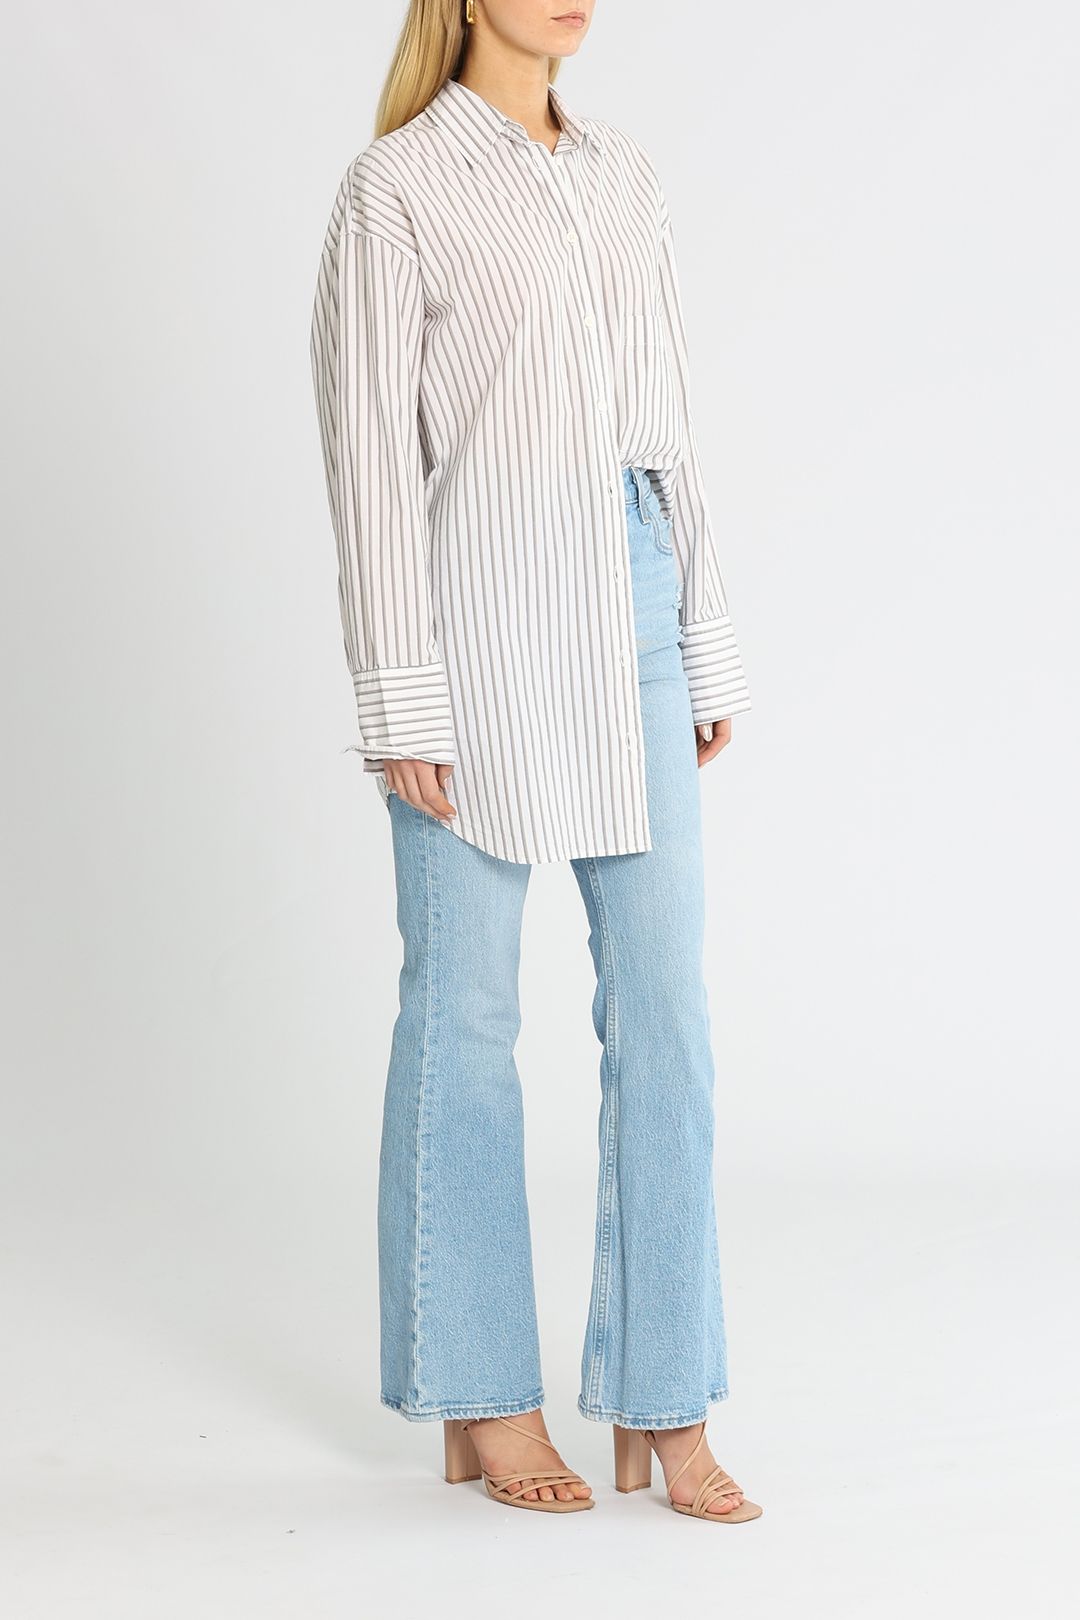 Assembly Label Riley Stripe Shirt Long Sleeves